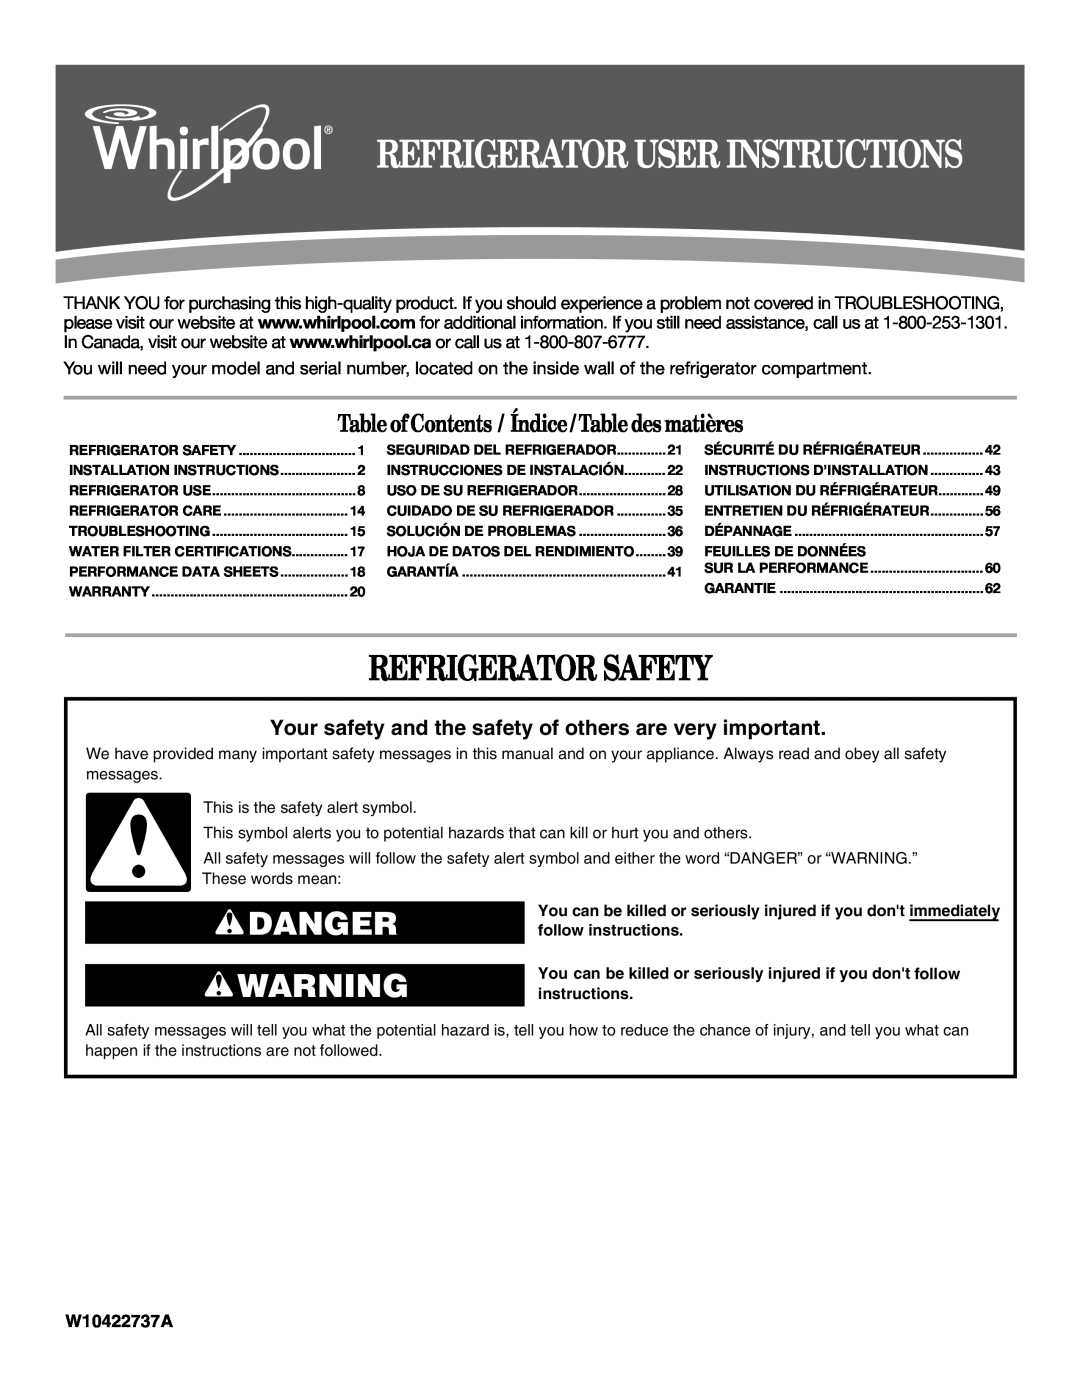 Whirlpool GI0FSAXVY installation instructions Refrigerator Safety, Danger, Table ofContents / Índice / Table des matières 